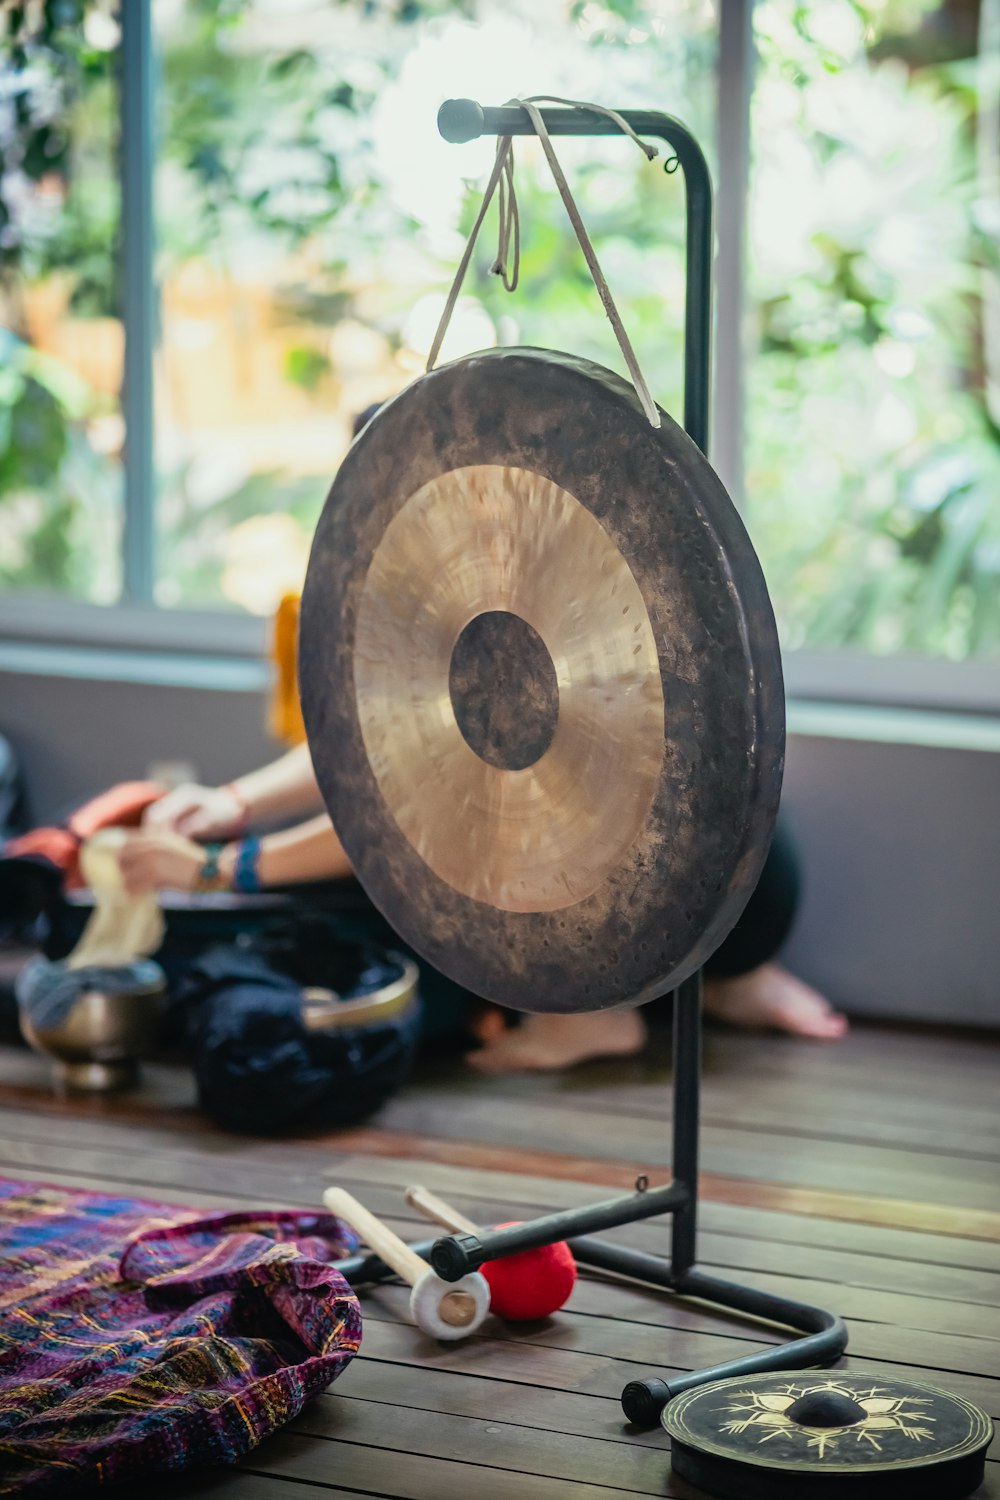 a person sitting on the floor next to a gong